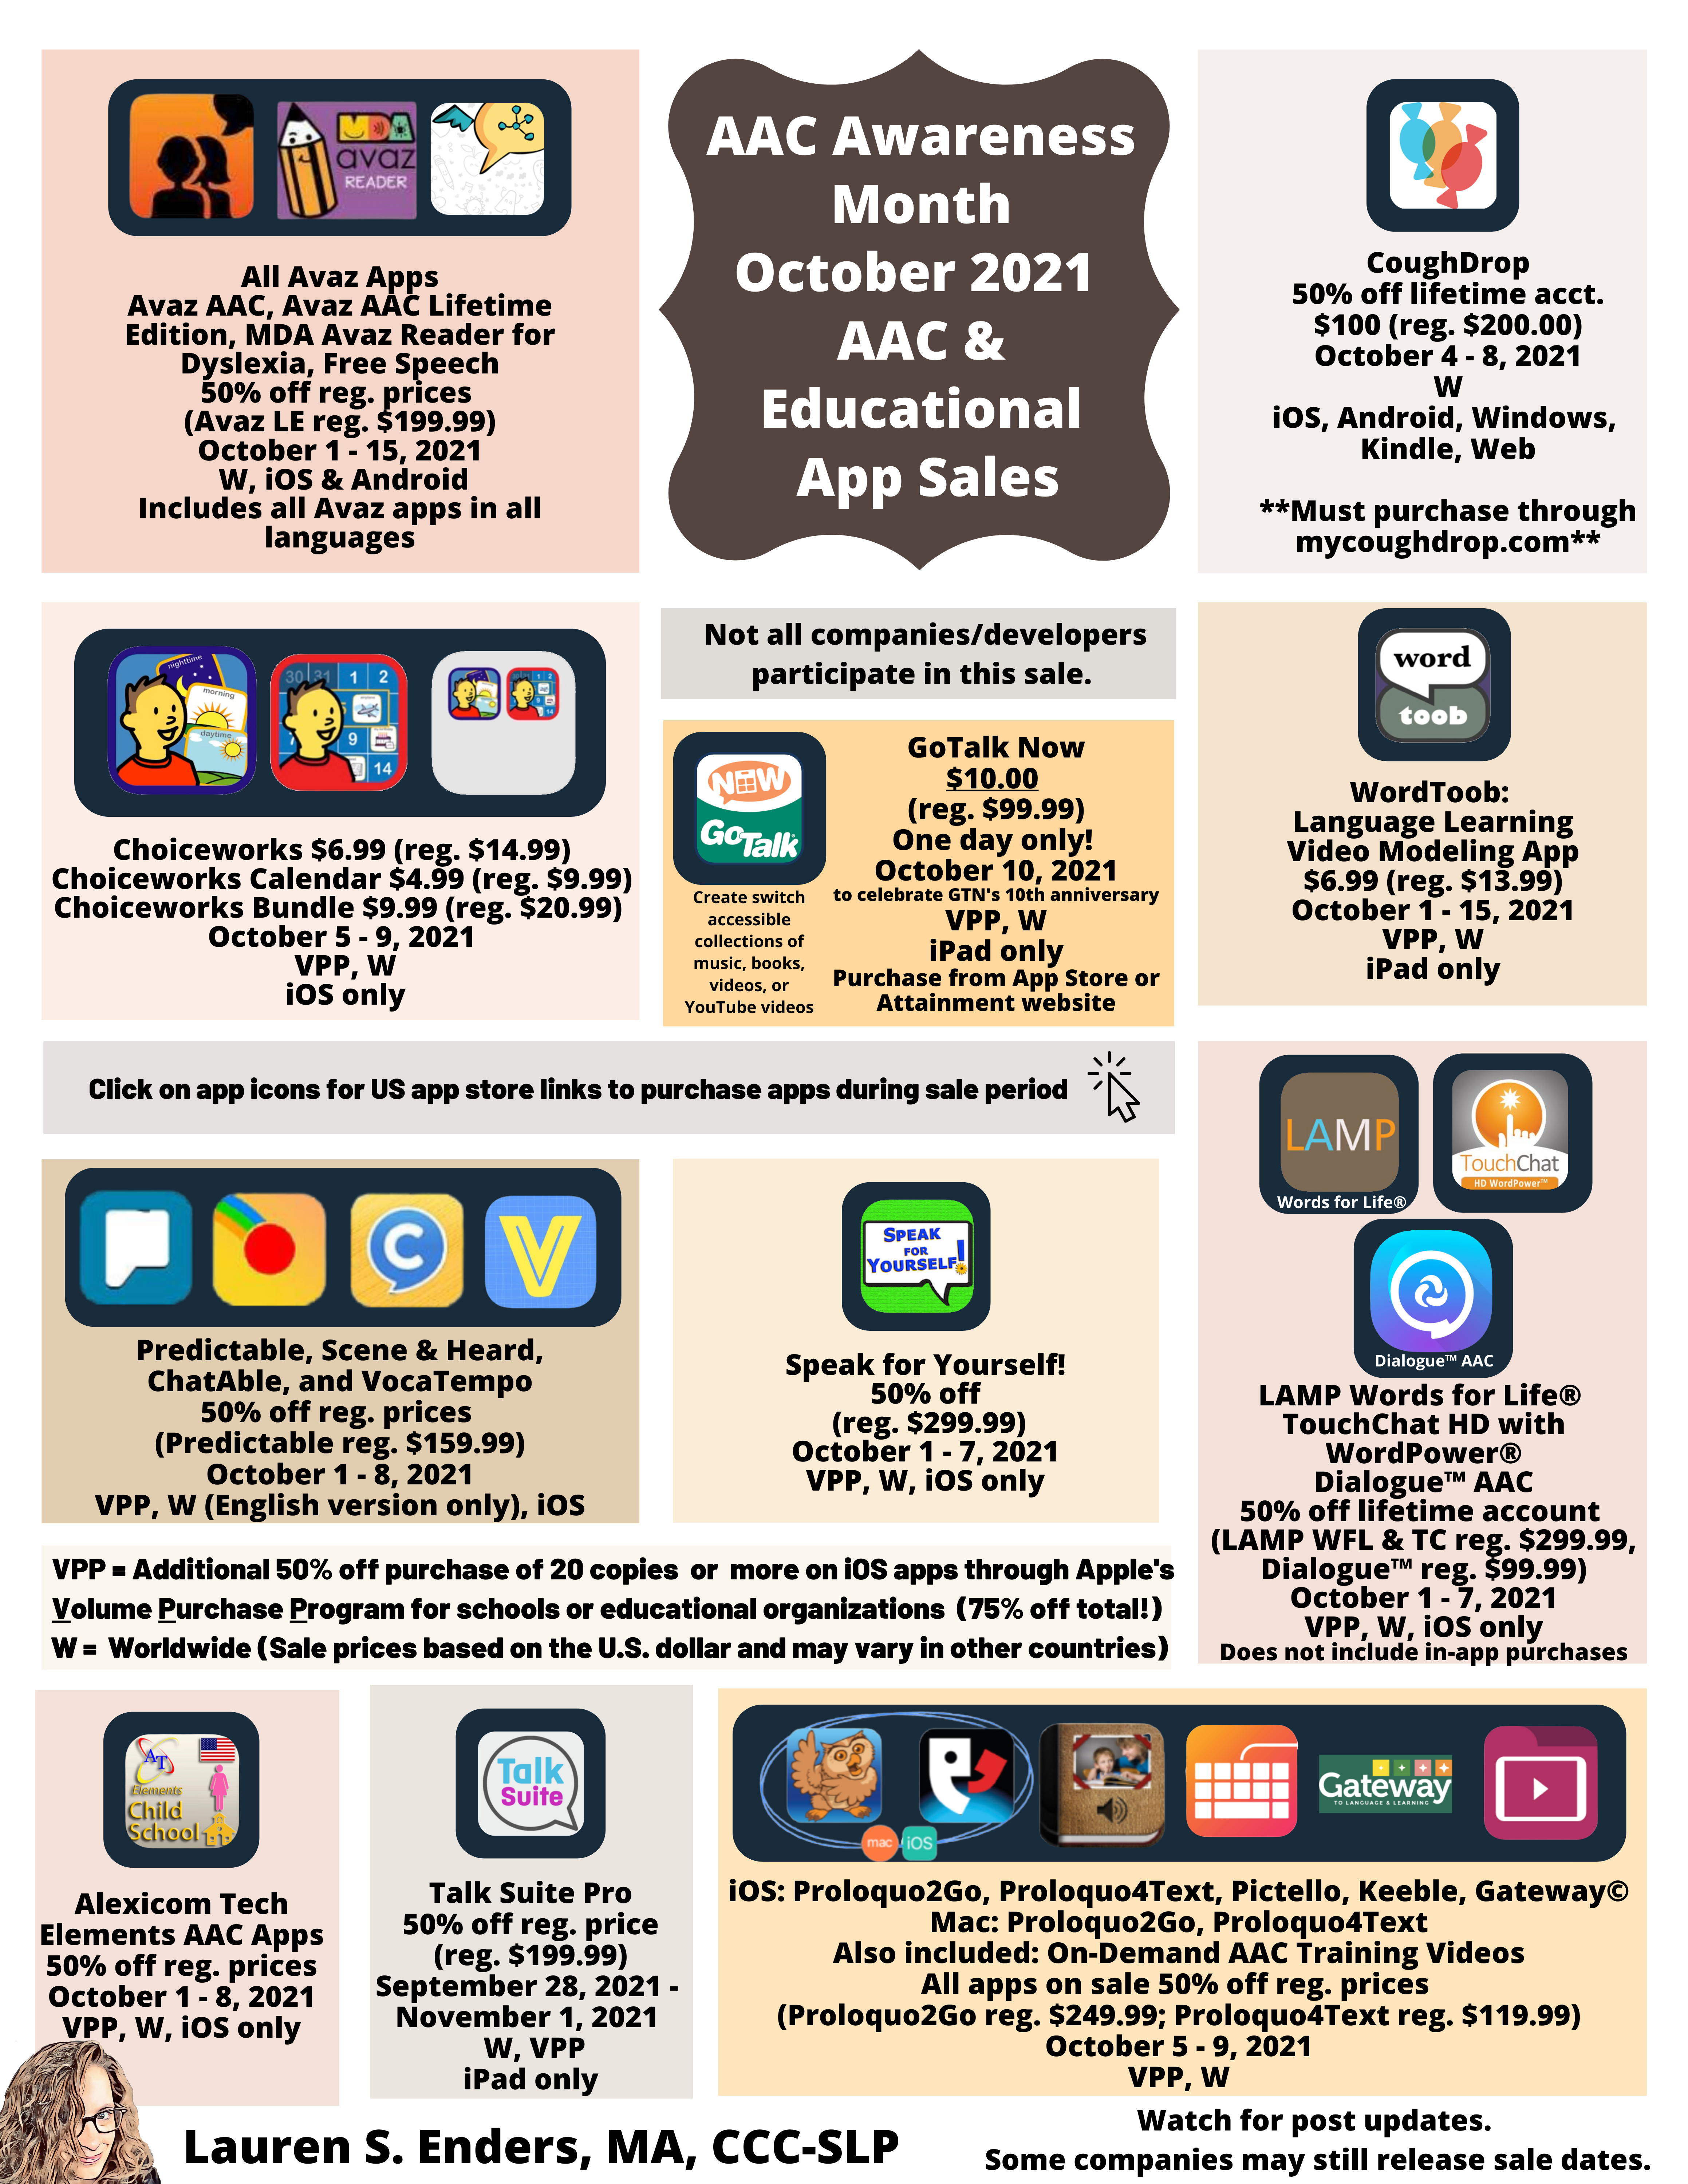 Infographic created by Lauren Enders showing numerous AAC apps/software on sale for AAC Awareness month. Plain text version linked below graphic.